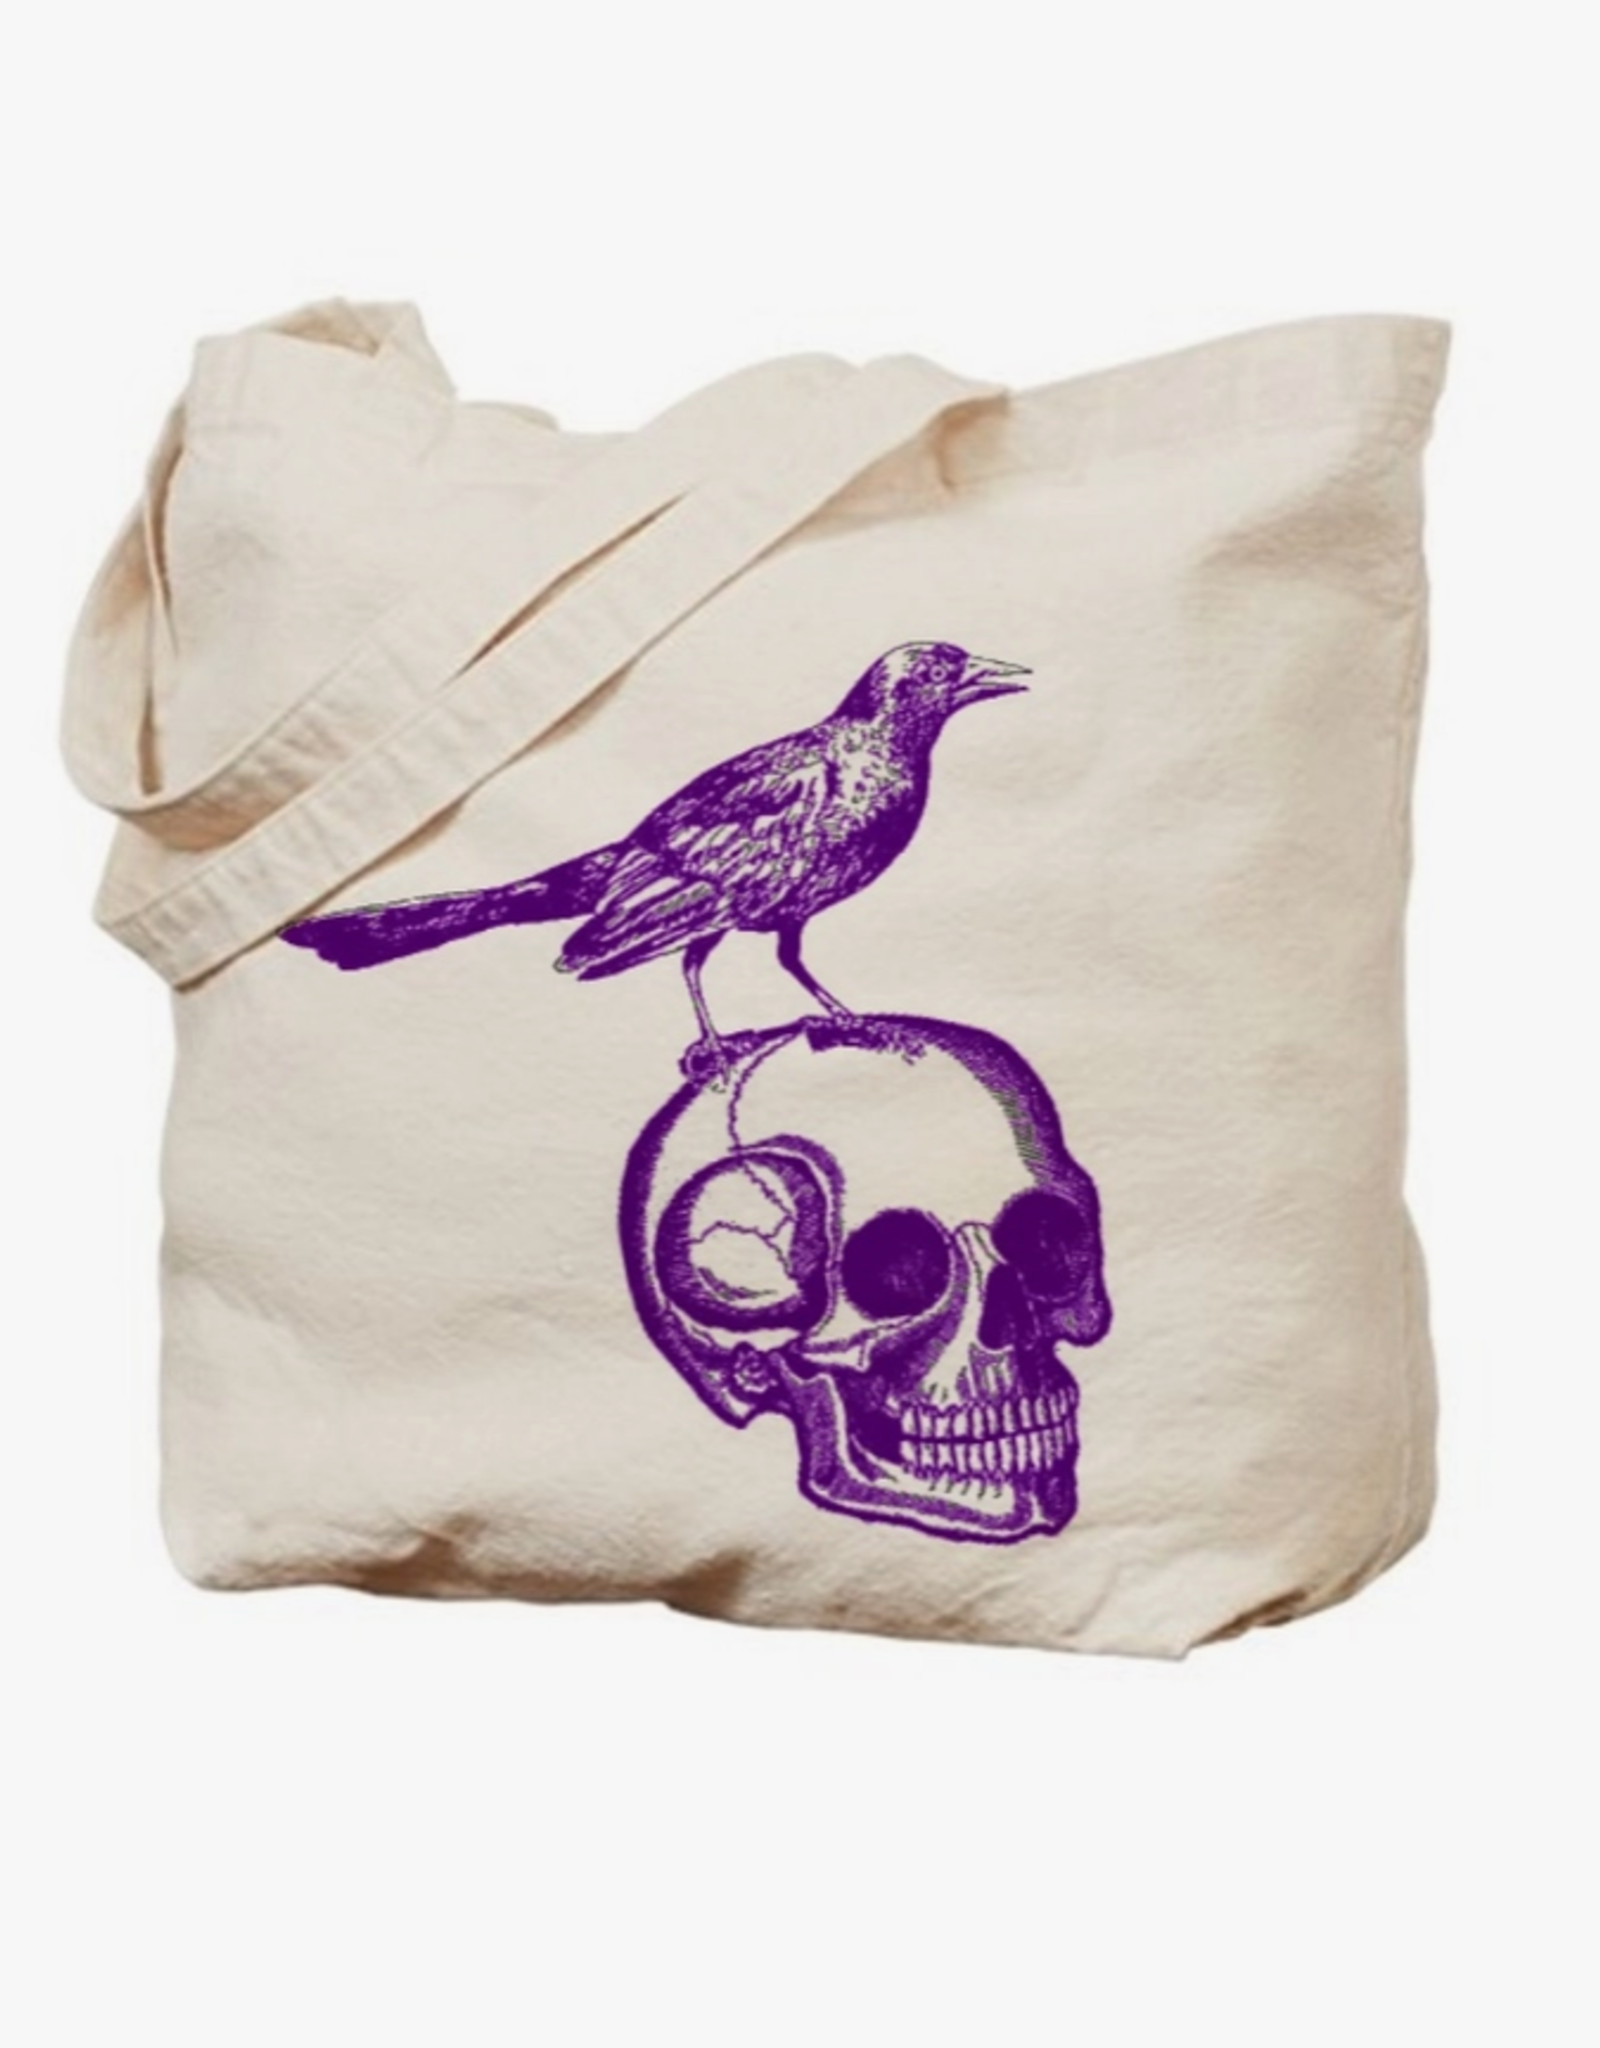 Skull and Raven Tote Bags|Purple